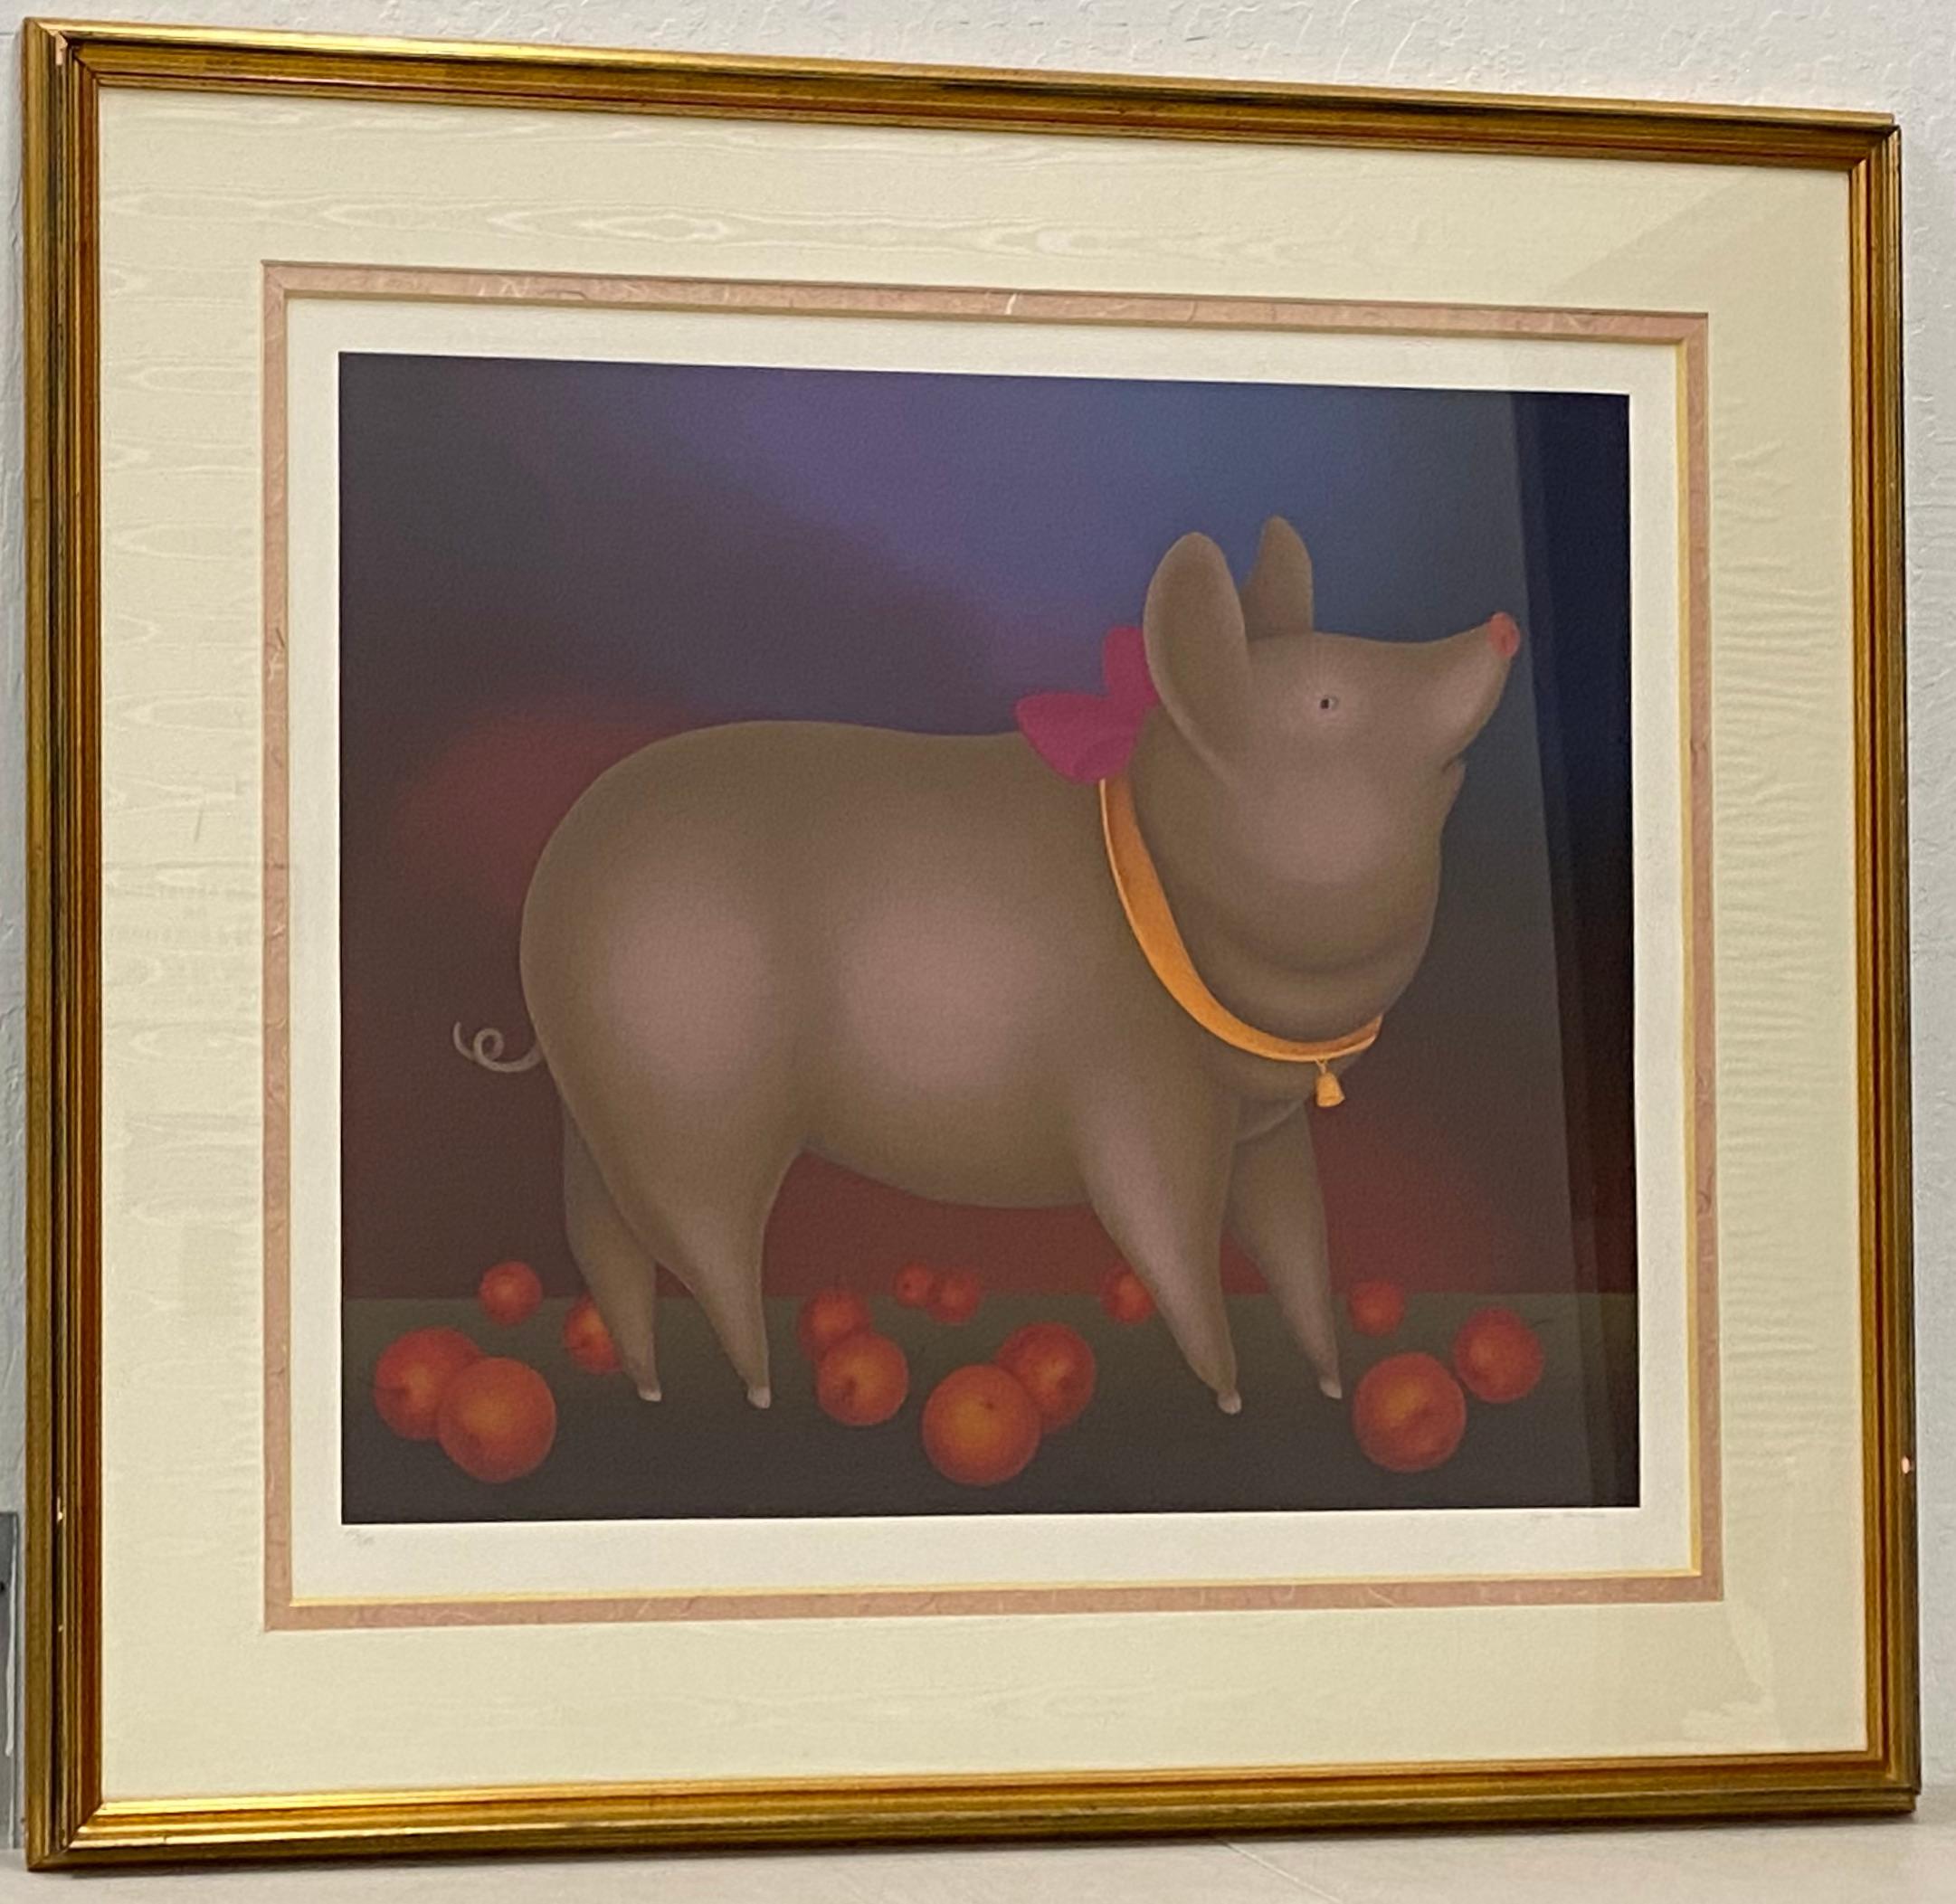 Igor Galanin "Pig With Pink Bow" Original Limited Edition Large Scale Serigraph C.1985

Serigraph dimensions 32.5" wide x 27.25" high

The frame measures 48" wide x 43" high

Very good condition - Lightly distressed frame

Pencil signed and numbered